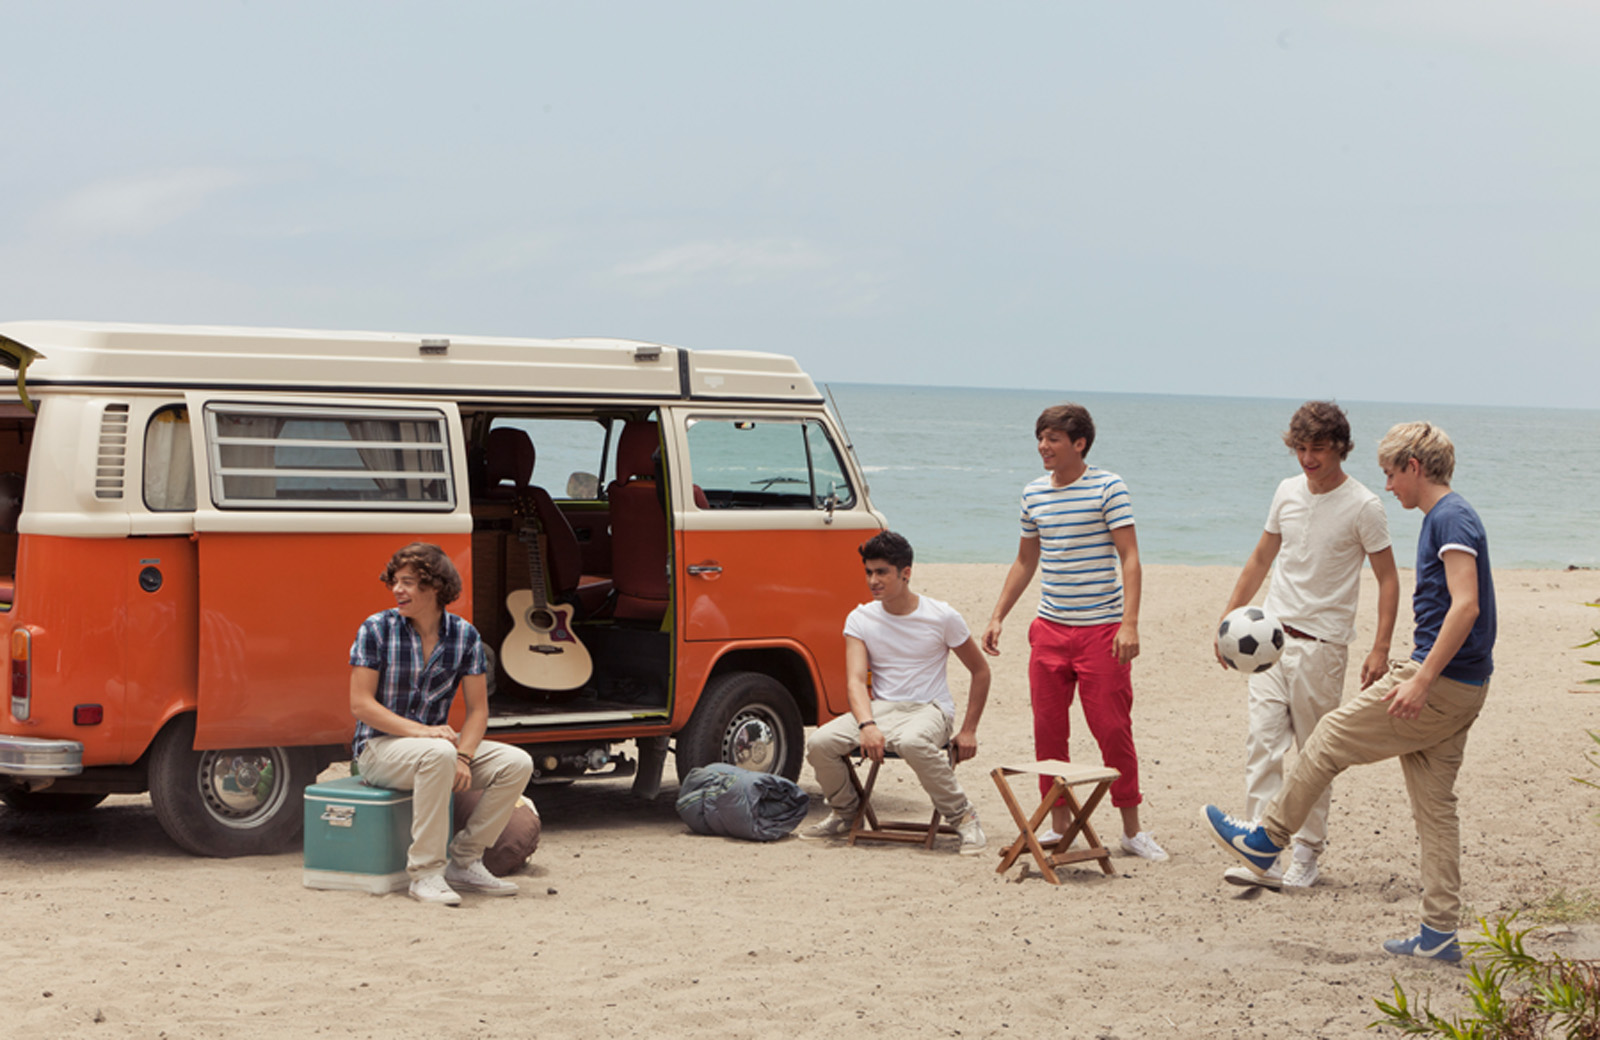 Liam Payne in Music Video: What Makes You Beautiful